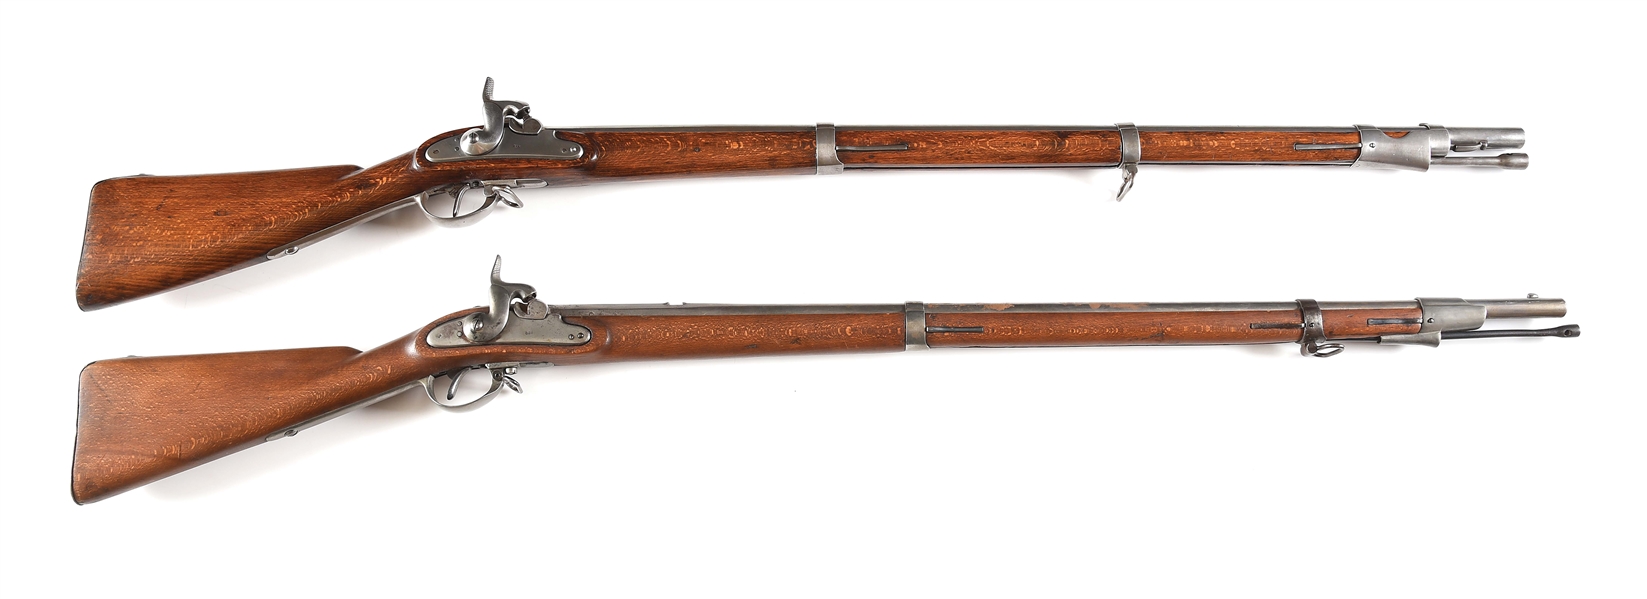 (A) LOT OF 2 AUSTRIAN LORENZ PERCUSSION RIFLED MUSKETS.